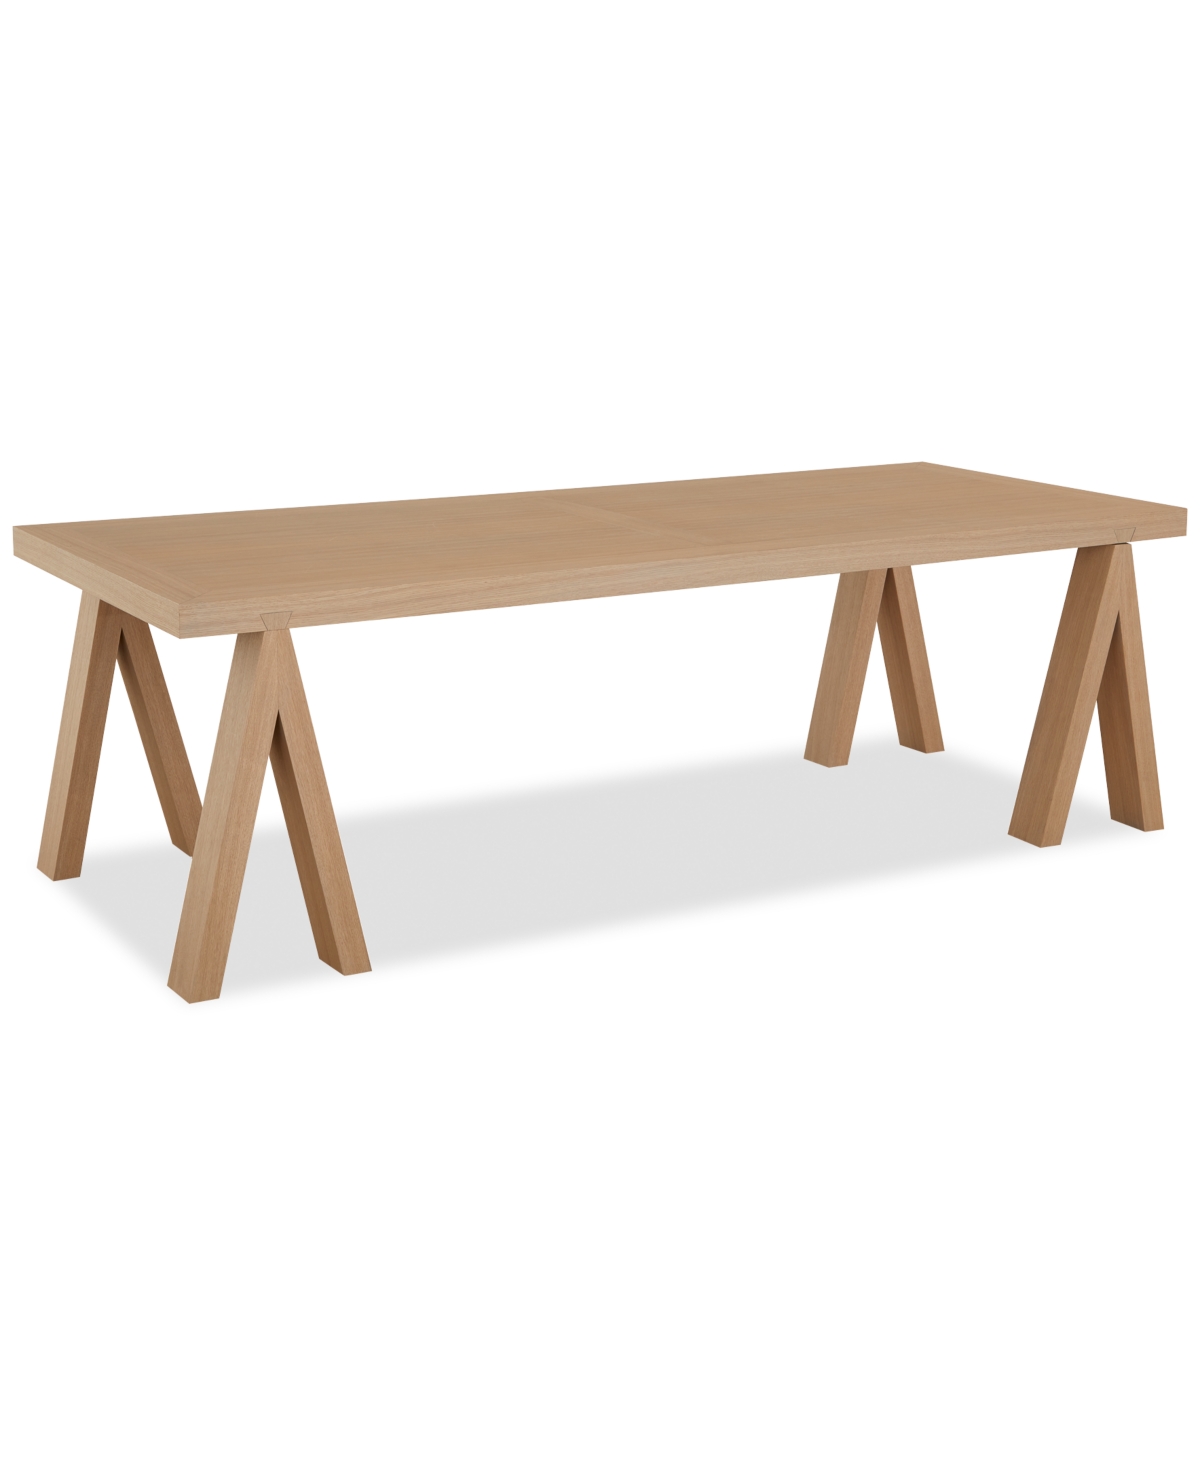 Drexel Atwell Dining Table In No Color